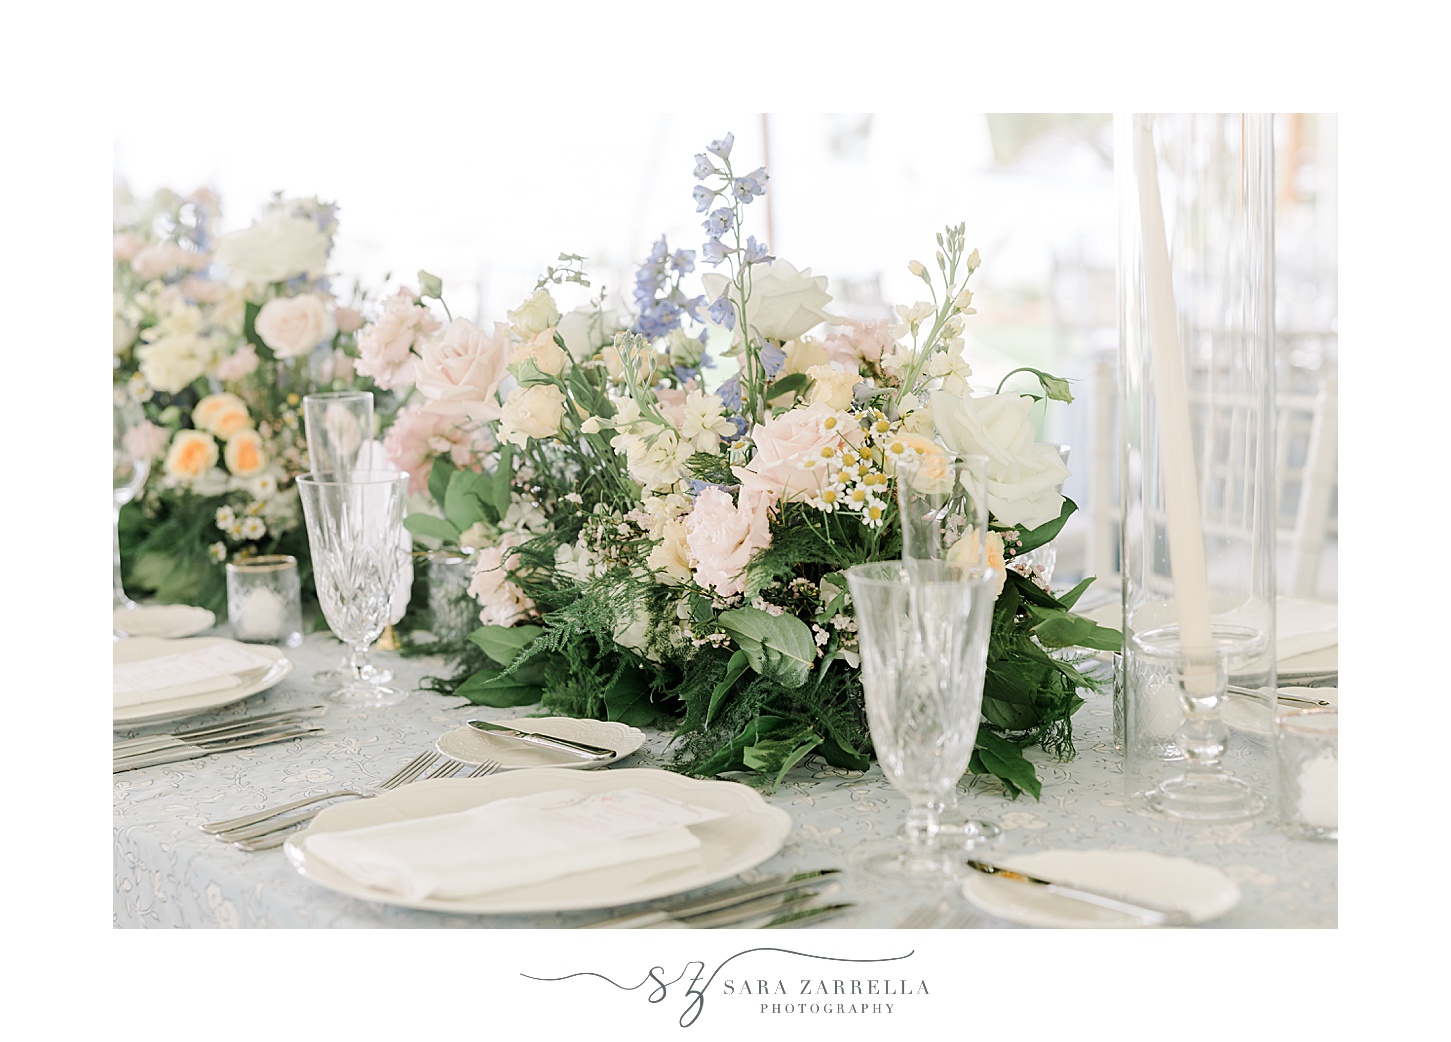 wedding reception with vintage glasses and pastel flower centerpieces at the Chanler